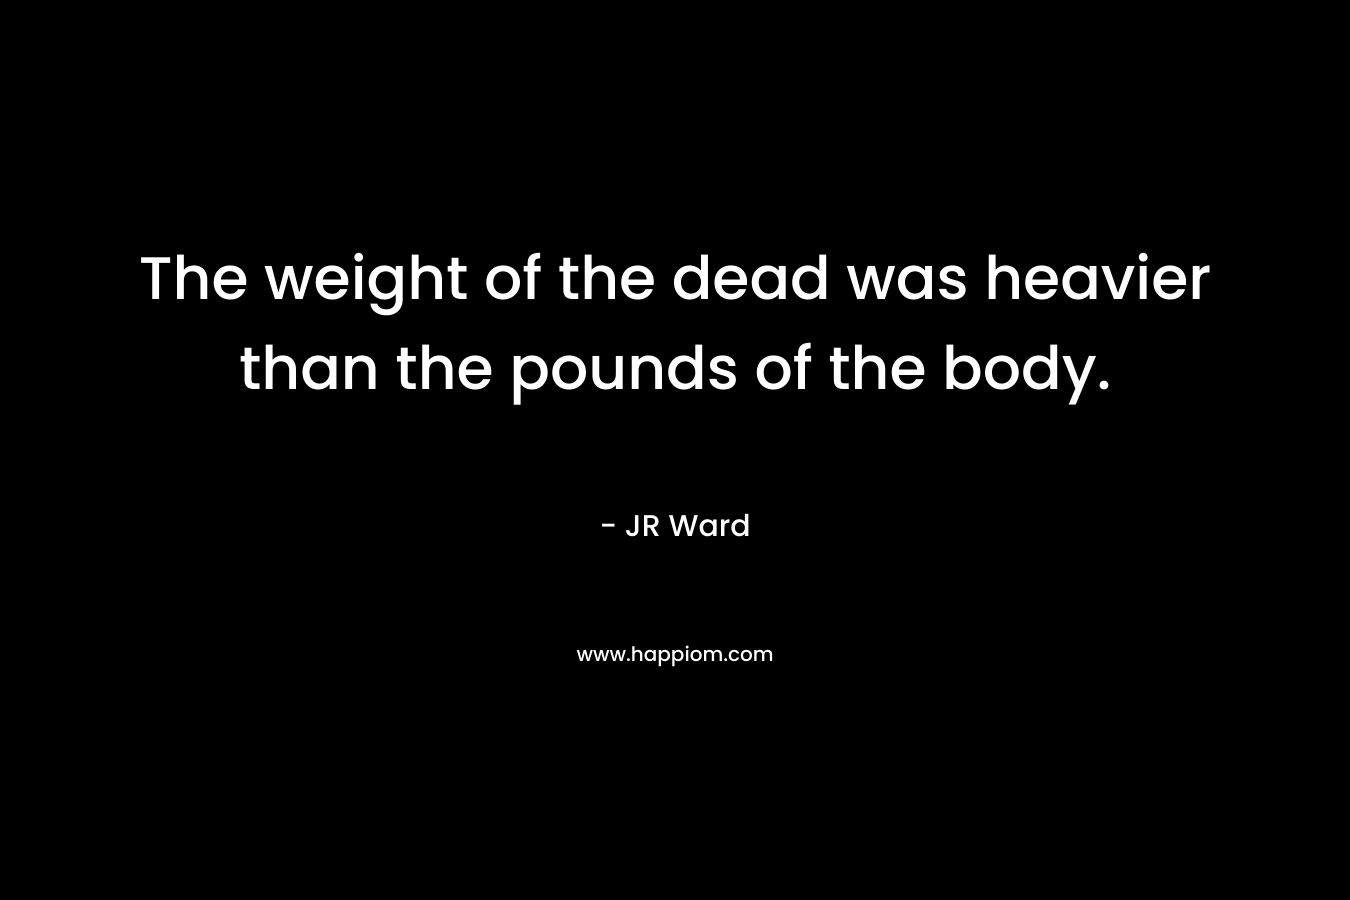 The weight of the dead was heavier than the pounds of the body. – JR Ward